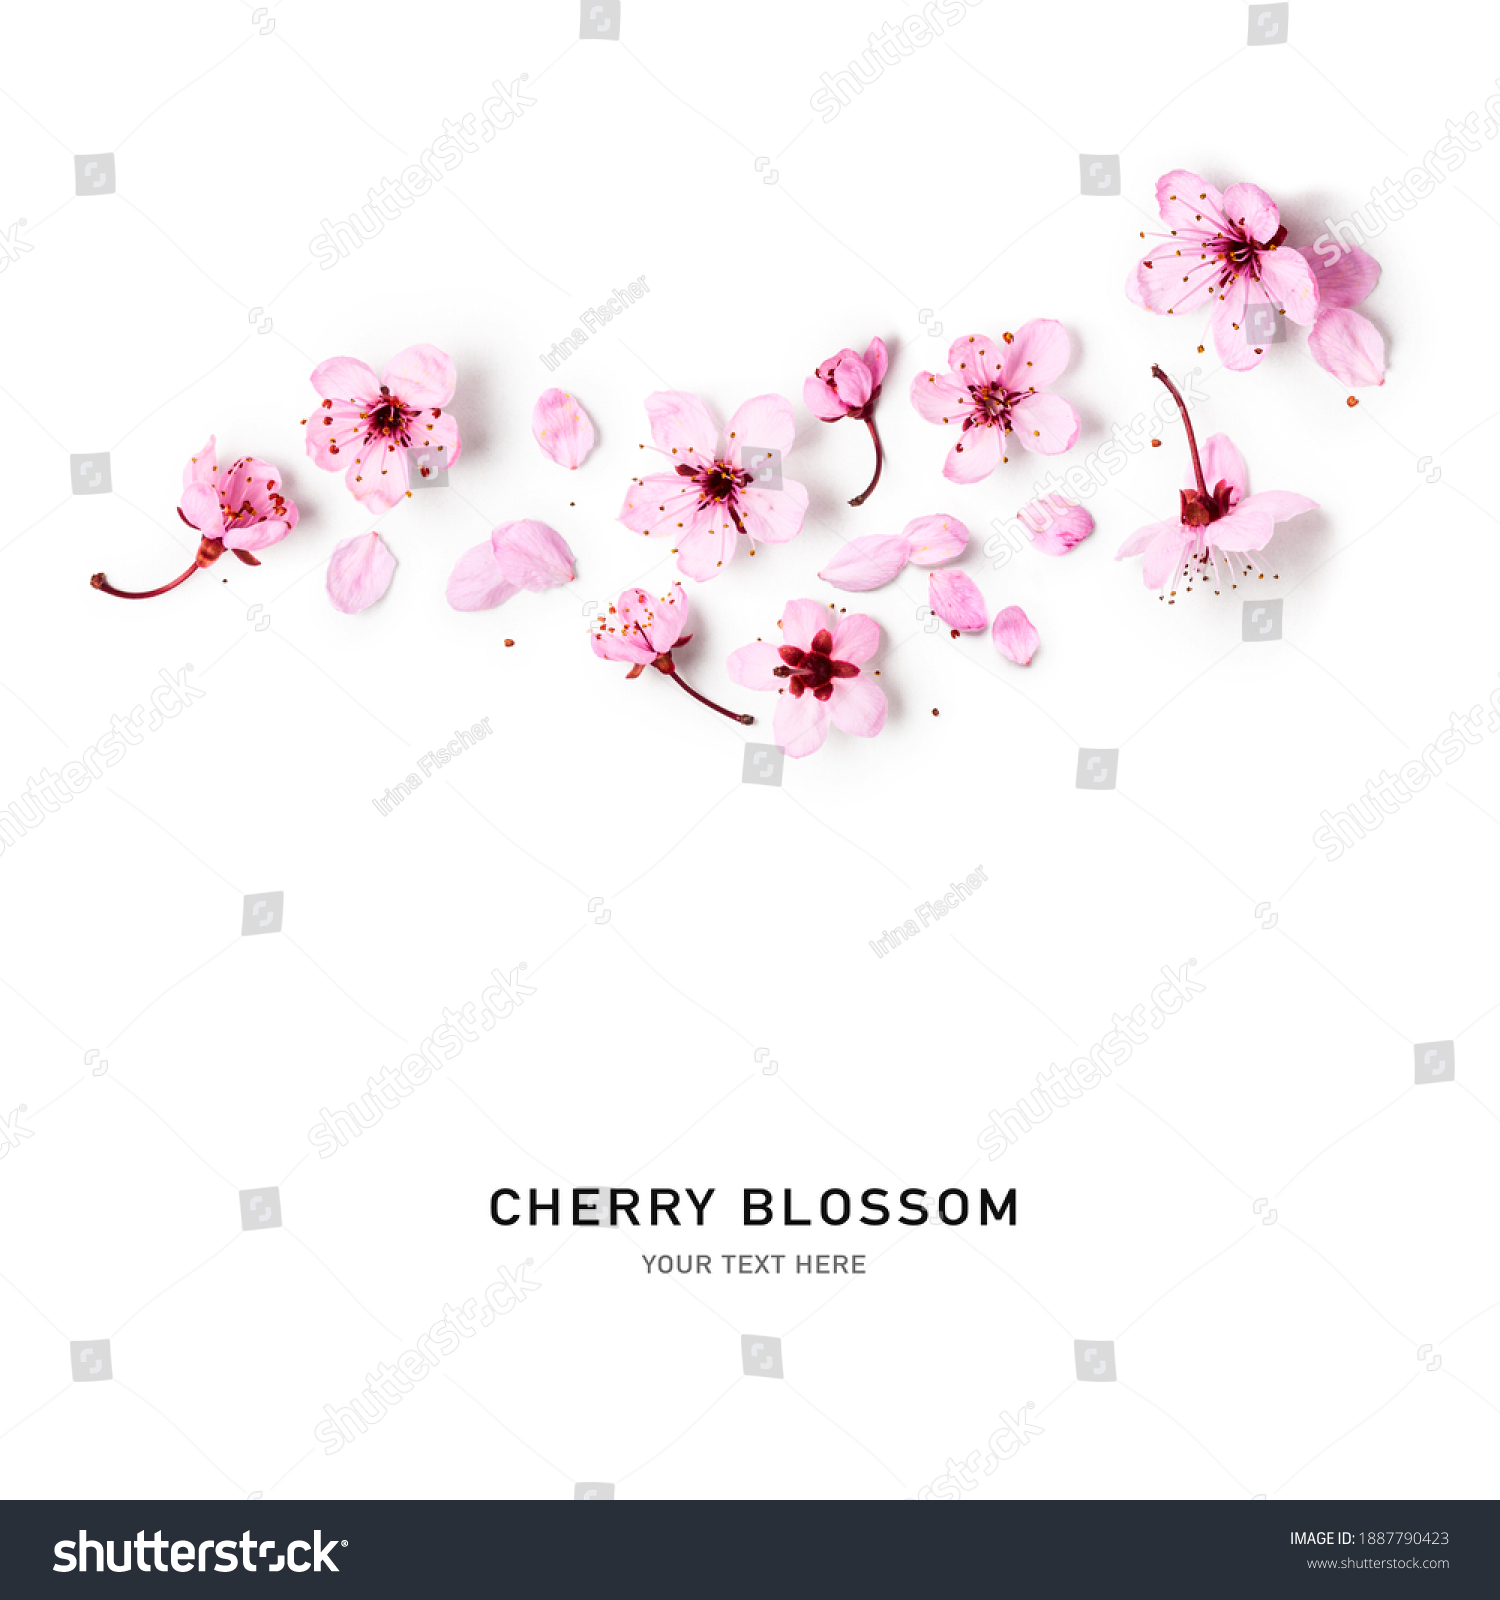 Cherry blossom. Creative composition with sakura spring flowers isolated on white background. Springtime arrangement. Holiday concept. Flat lay, top view, floral design #1887790423